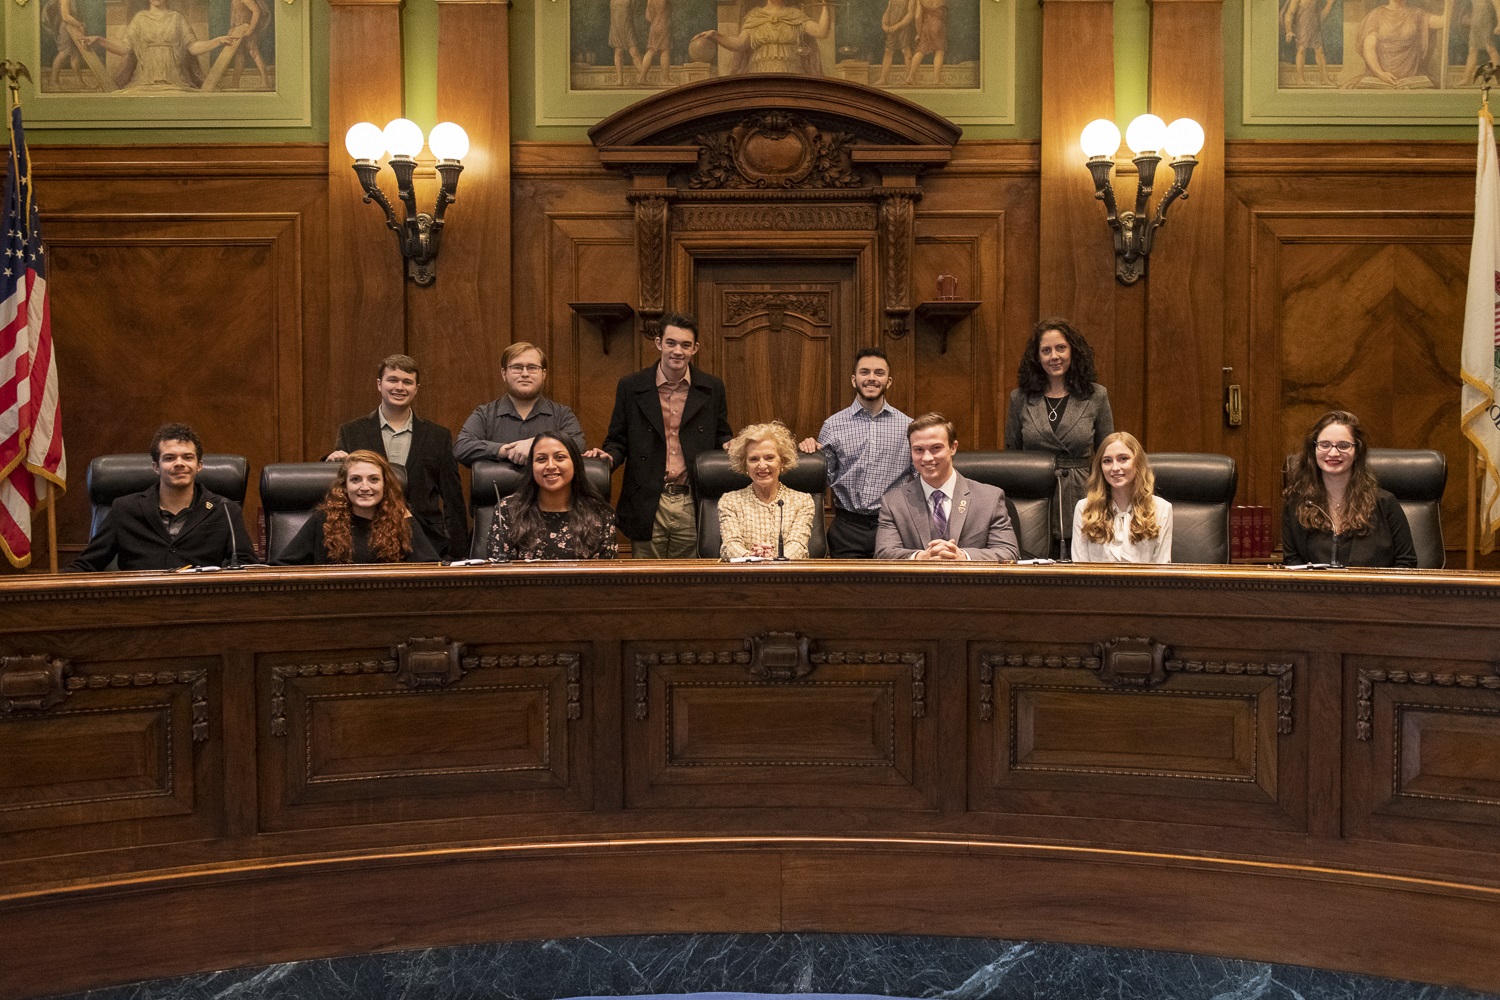 UIS Students pictured with (now retired) Chief Justice Anne Burke during a UIS Pre-Law Centered visit to the Illinois Supreme Court in January 2020.